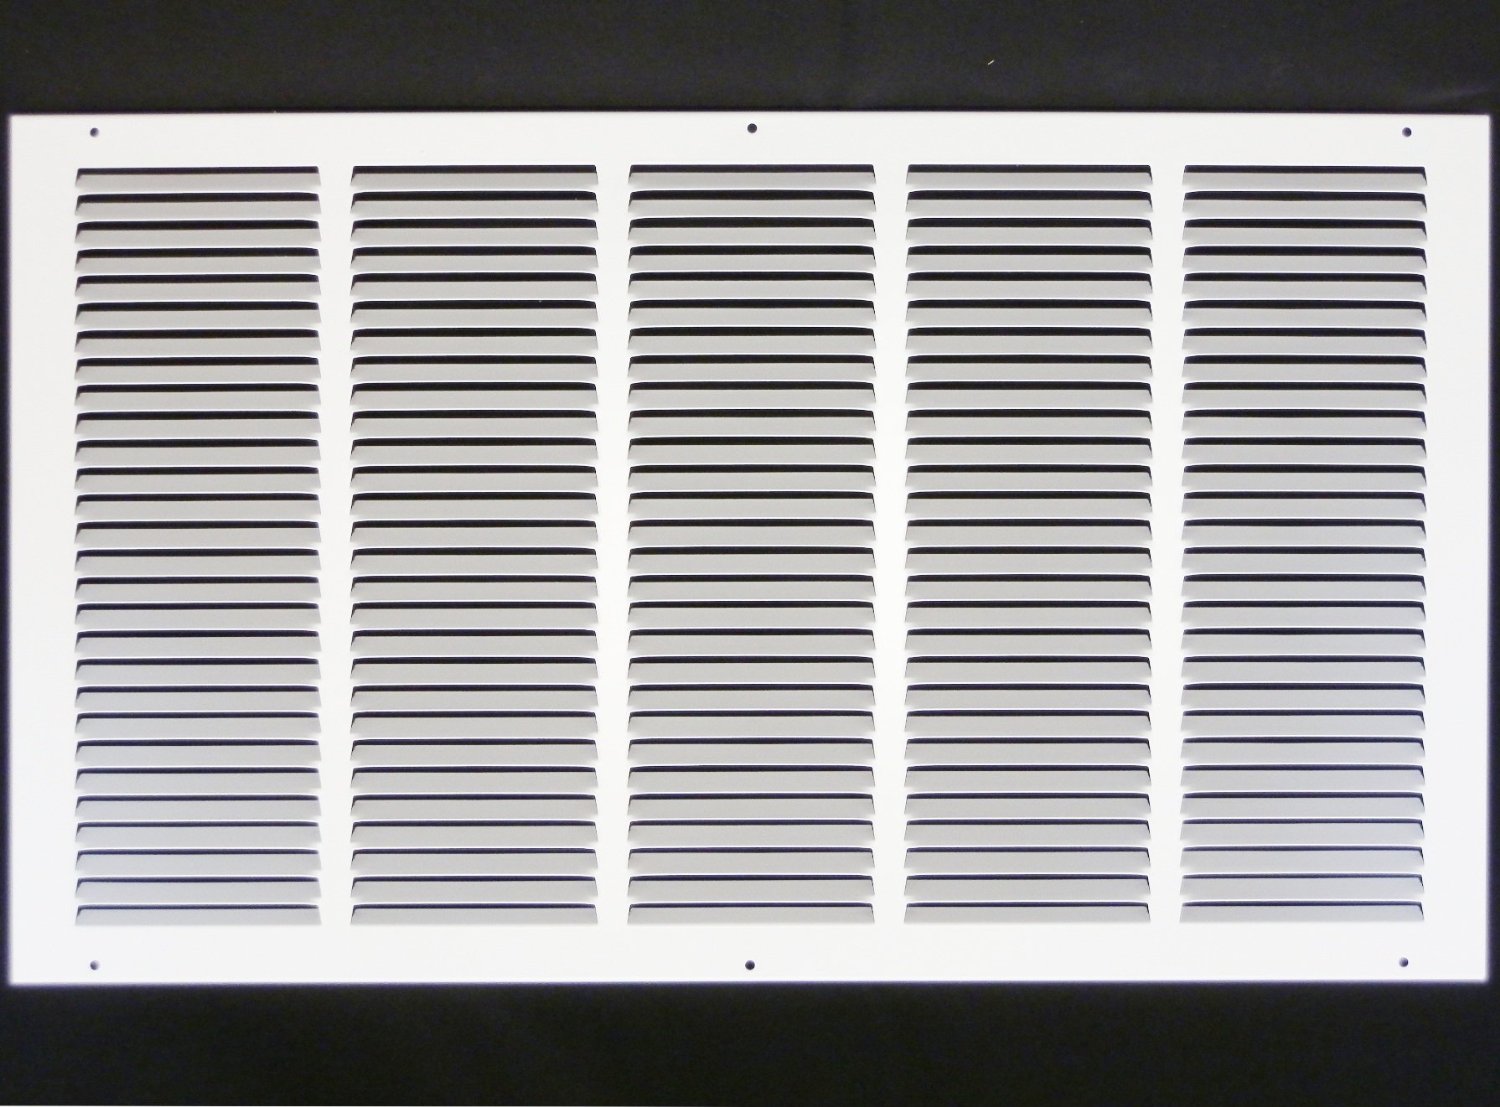 25" X 14" Air Vent Return Grilles - Sidewall and Ceiling - Steel